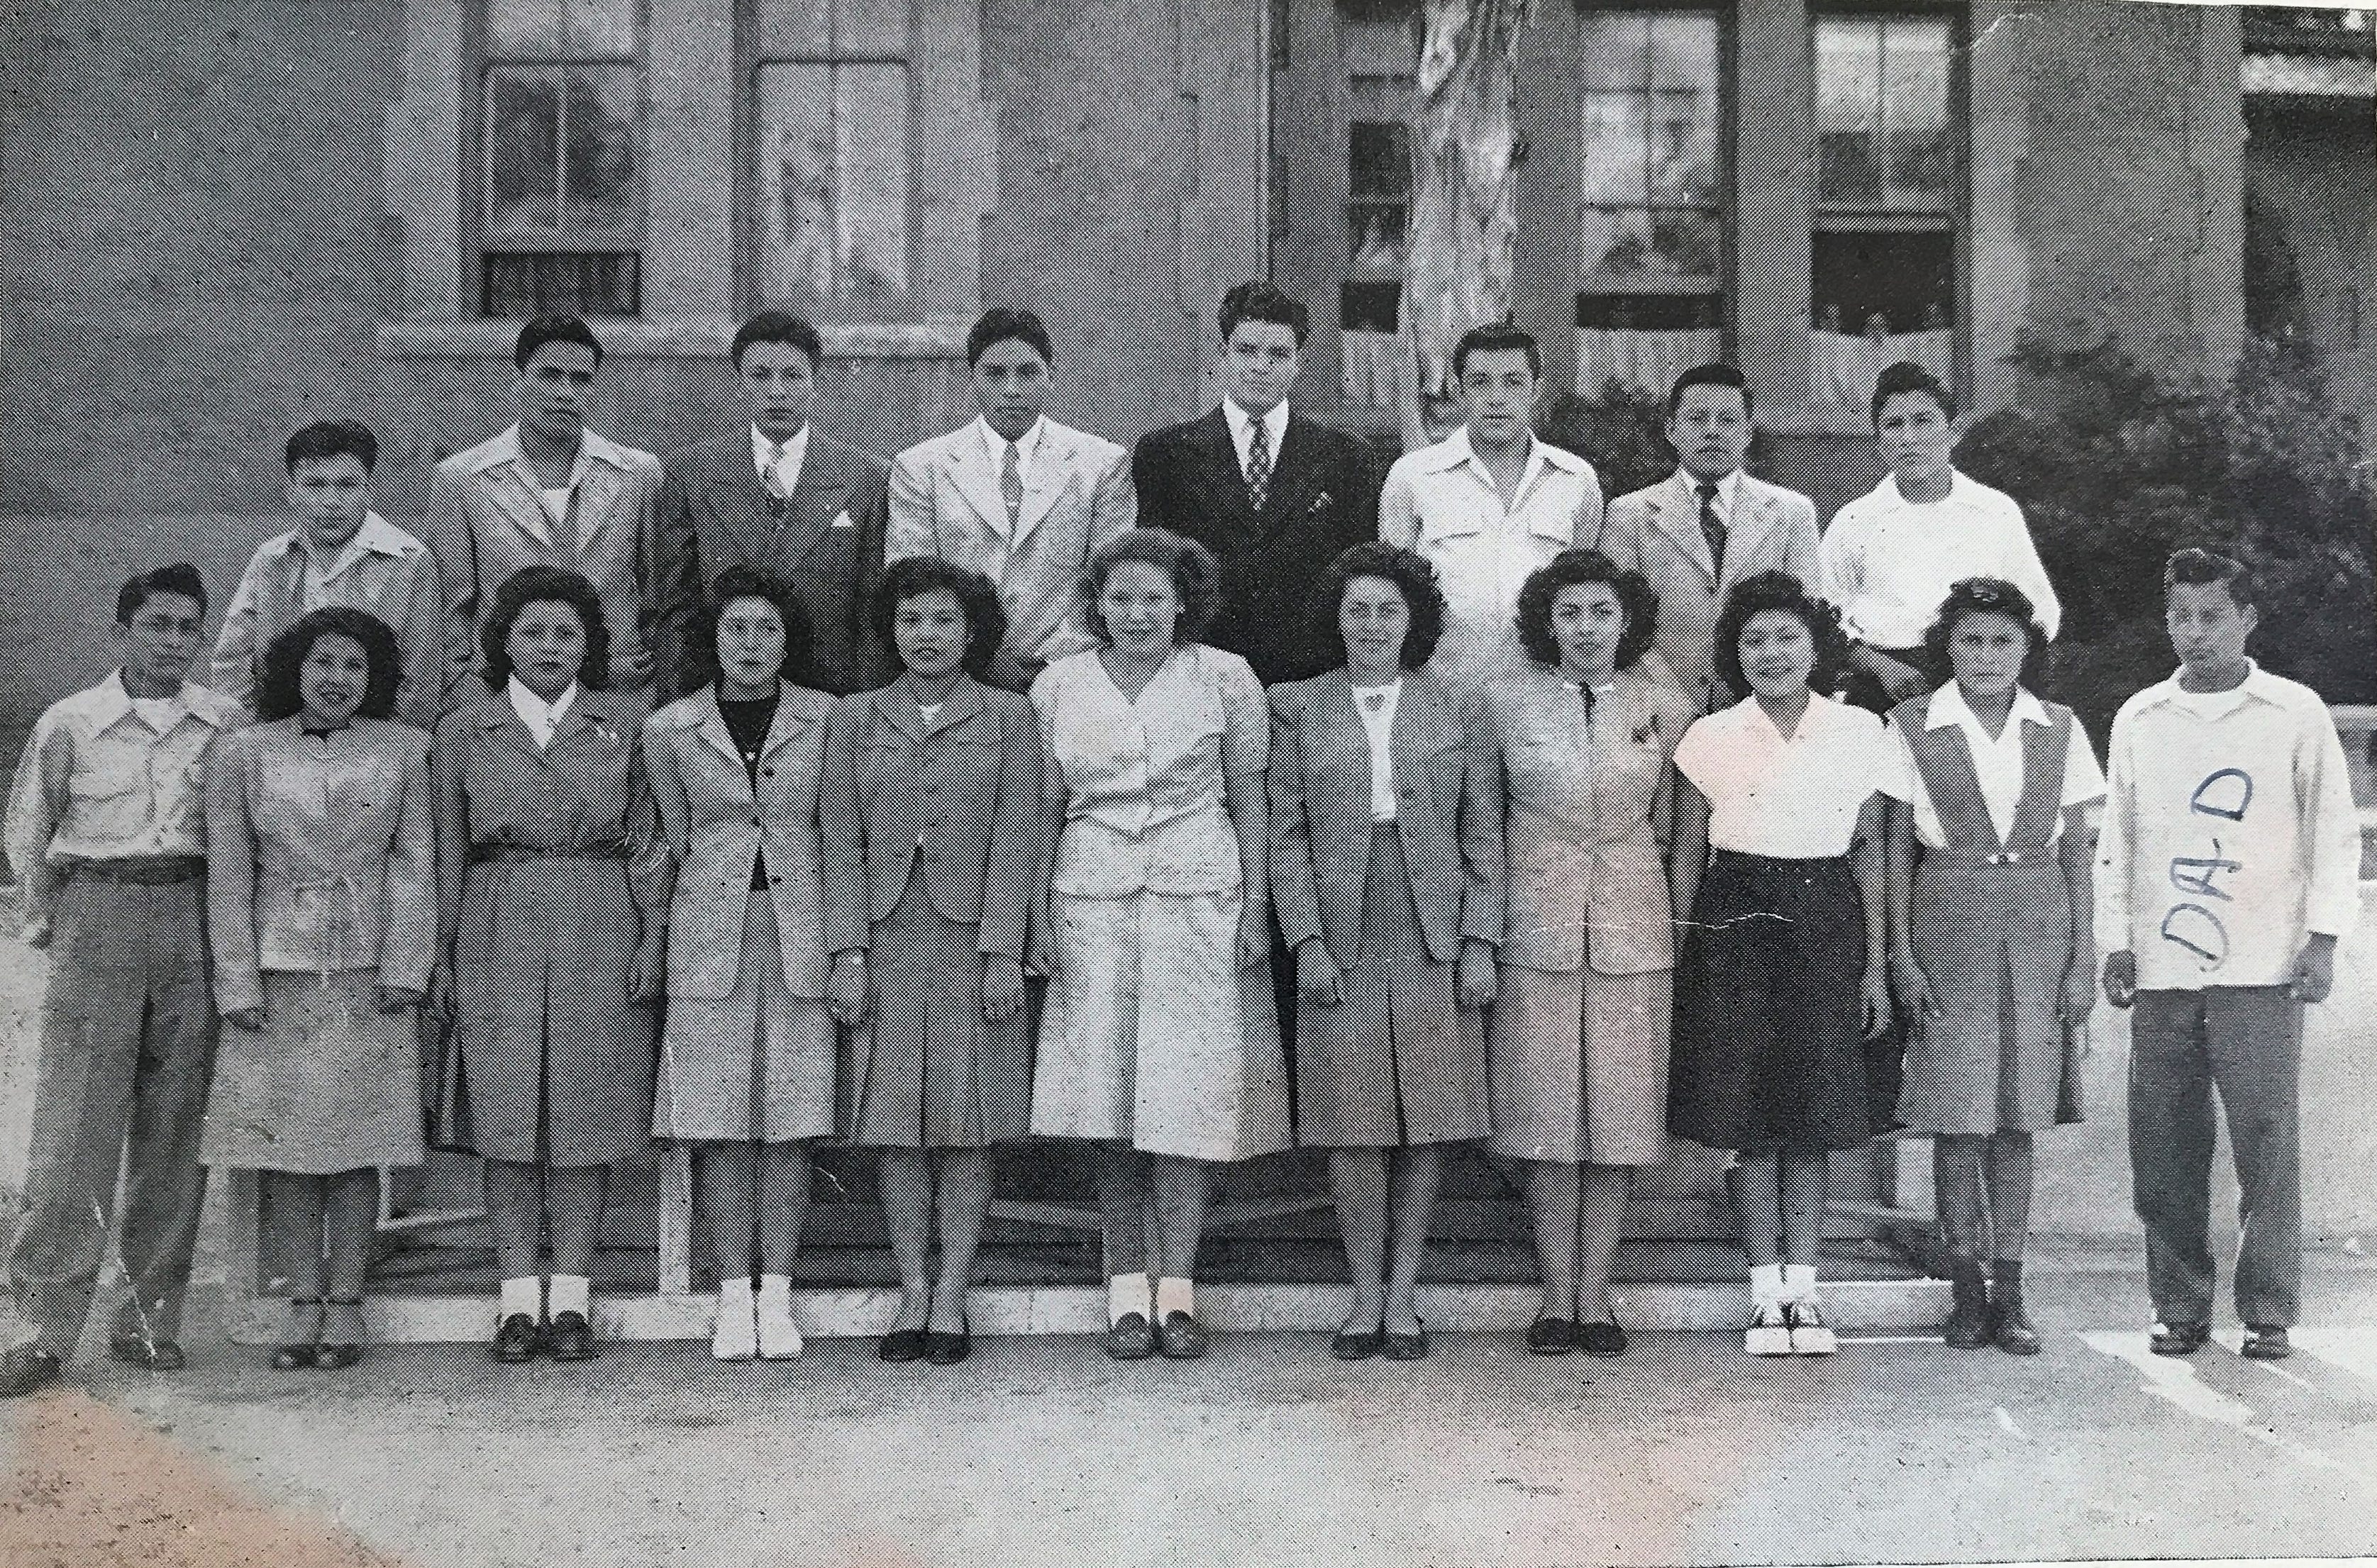 The 1948 yearbook for Sherman Indian High School shows April Carmelo's father, Daniel Carmelo, first row at far right, in a photo of the associated student body cabinet for 1947-48.